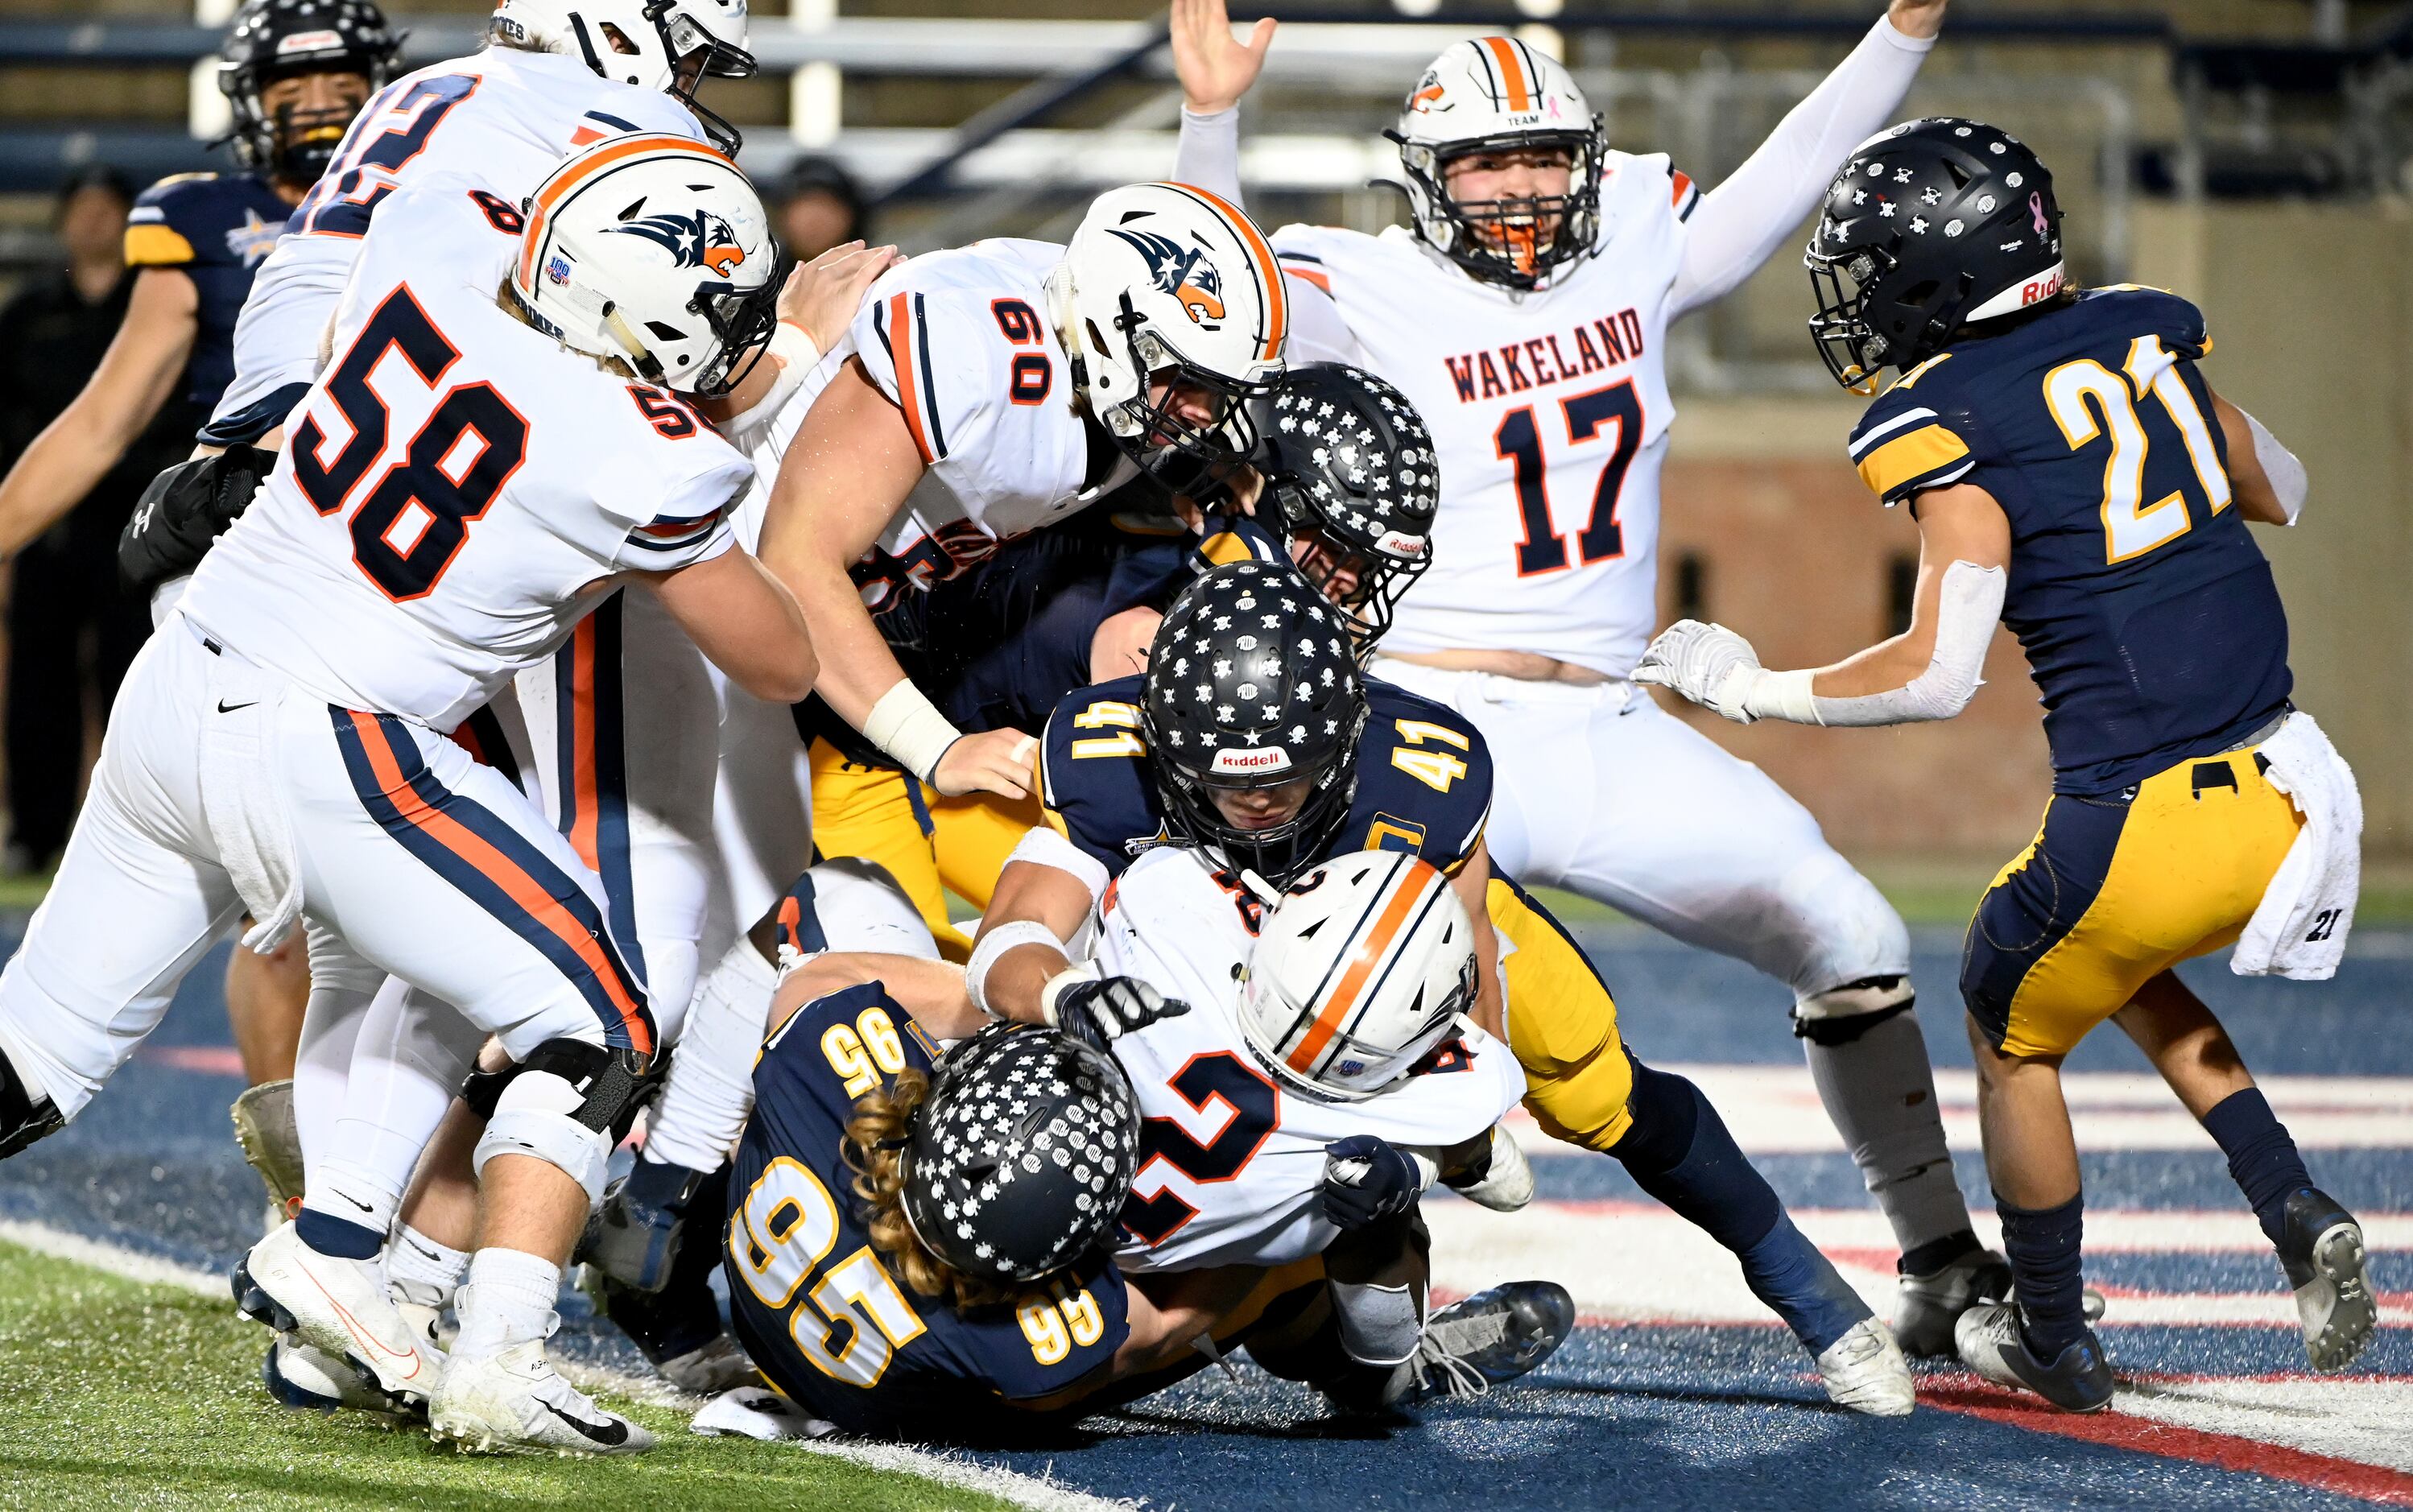 Wakeland's Jared White (2) scores the game-winning two point conversion in the final minute...